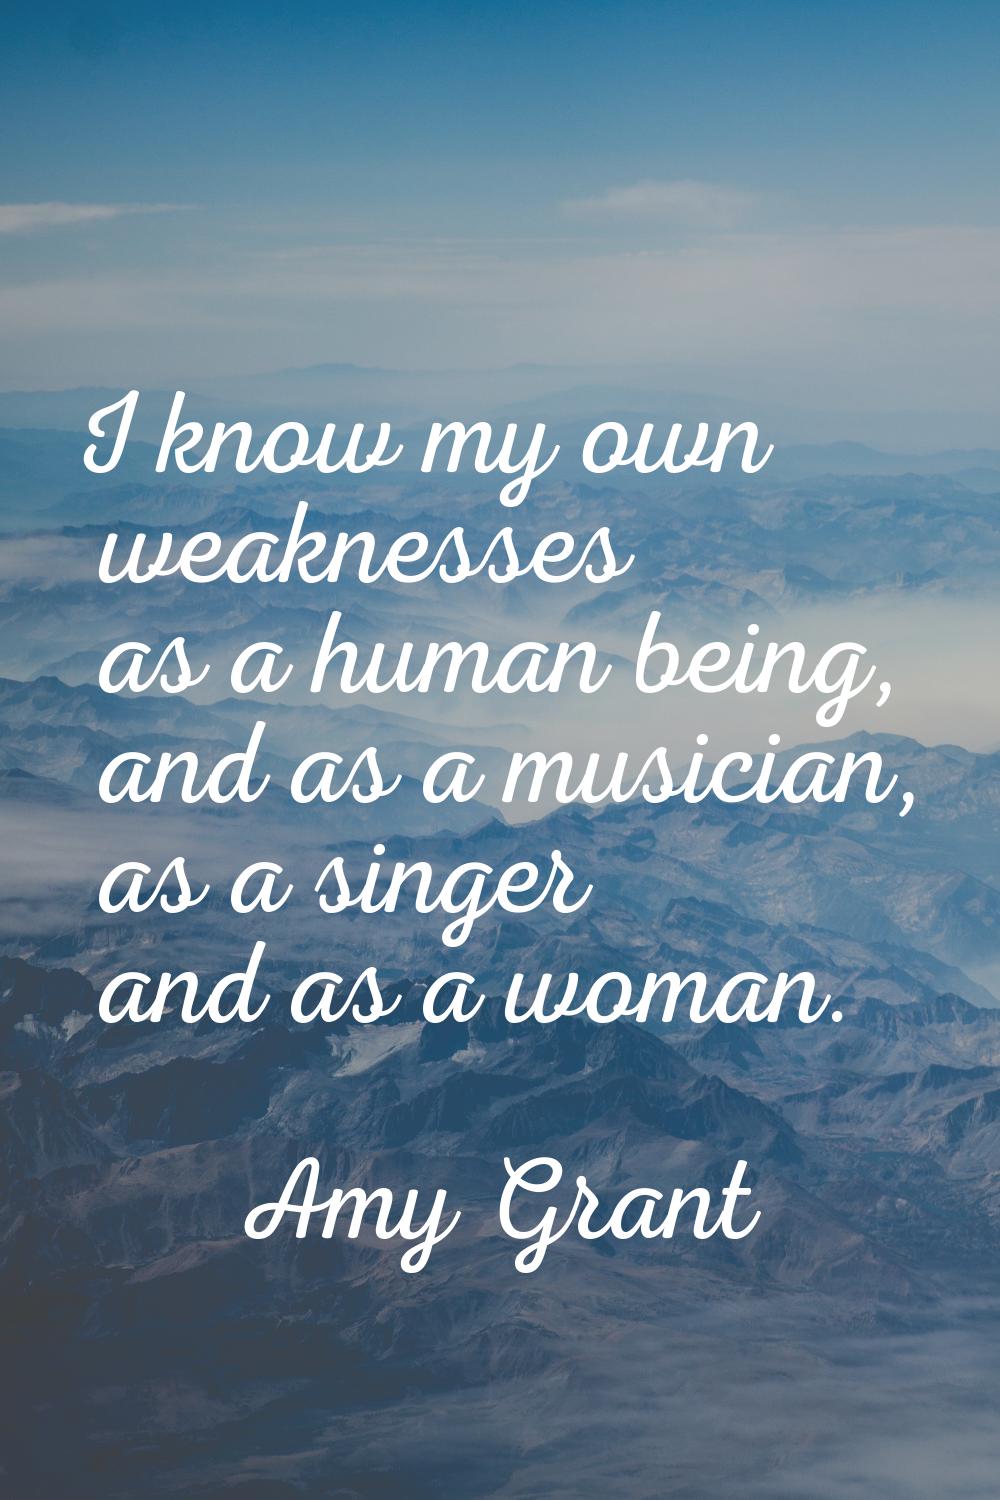 I know my own weaknesses as a human being, and as a musician, as a singer and as a woman.